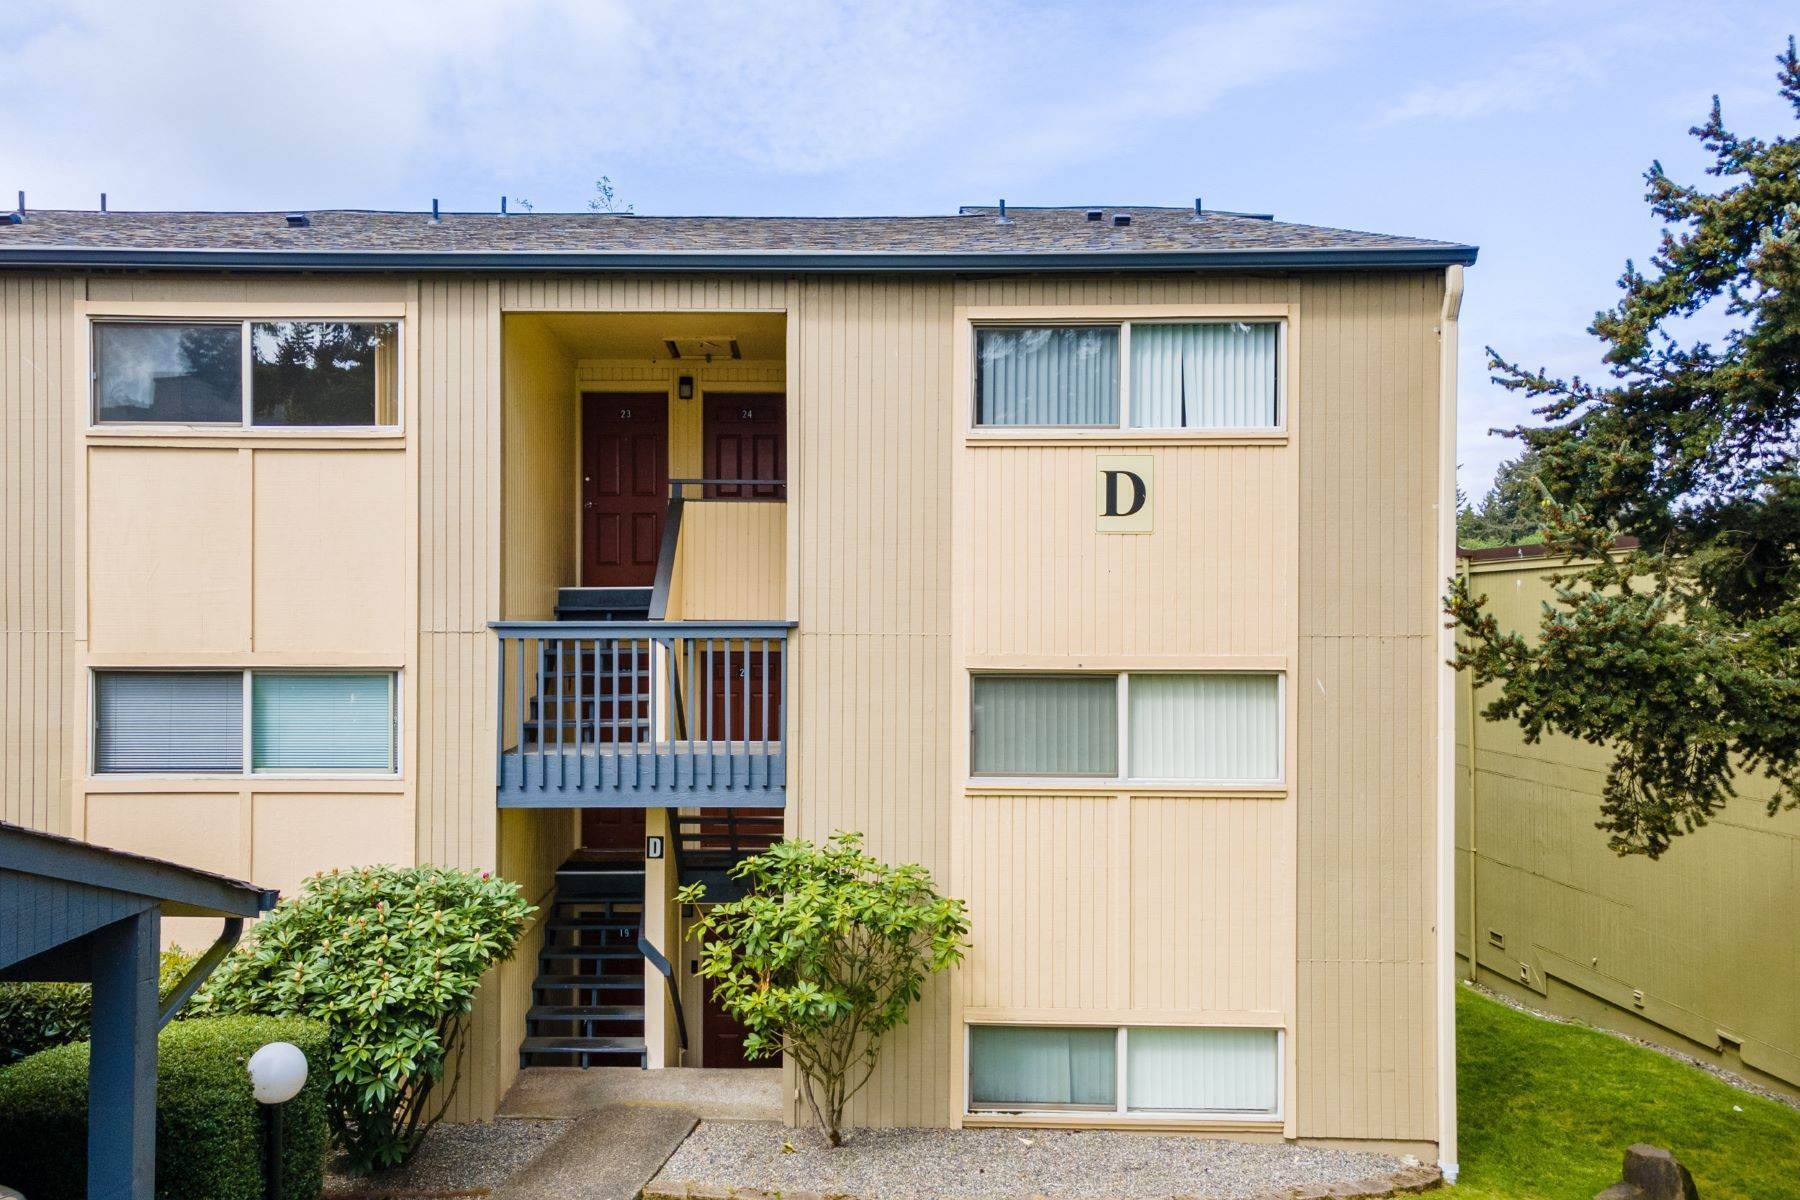 Condominiums for Sale at 31003 14th Ave S Unit #D-23, Federal Way, WA 98003 31003 14th Ave S Unit #D-23 Federal Way, Washington 98003 United States